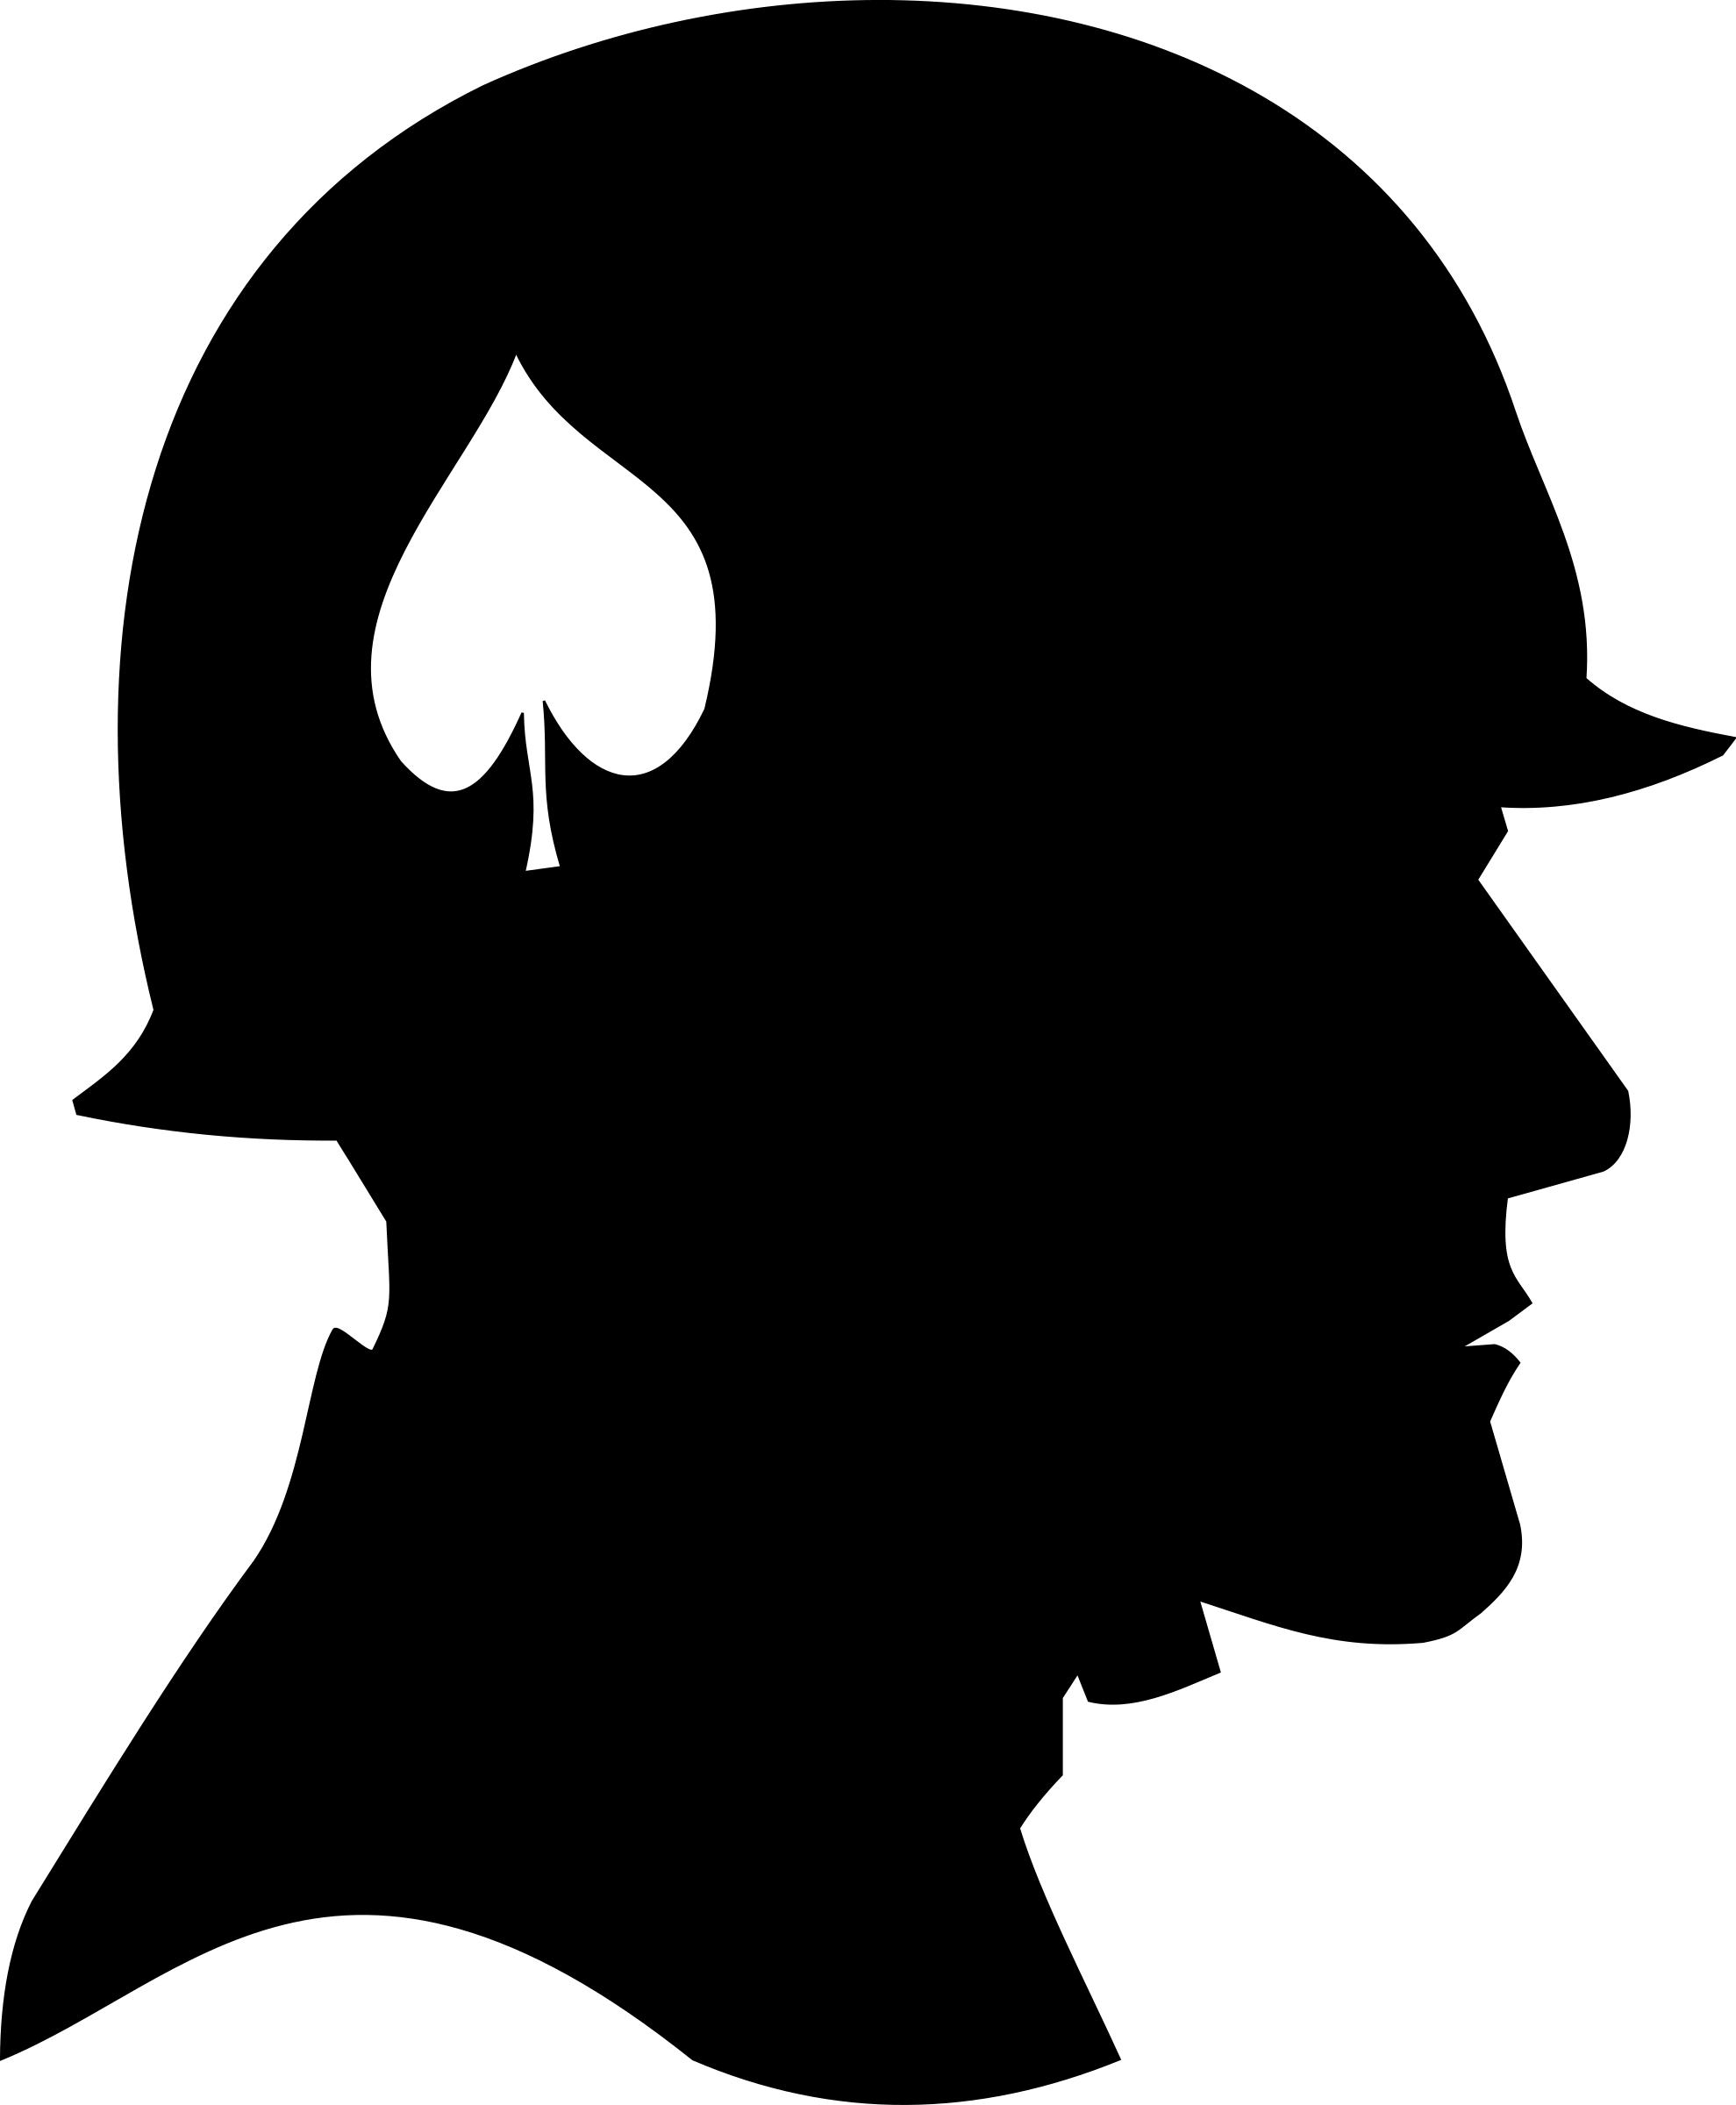 U.S. World War Two Soldier Silhouette png